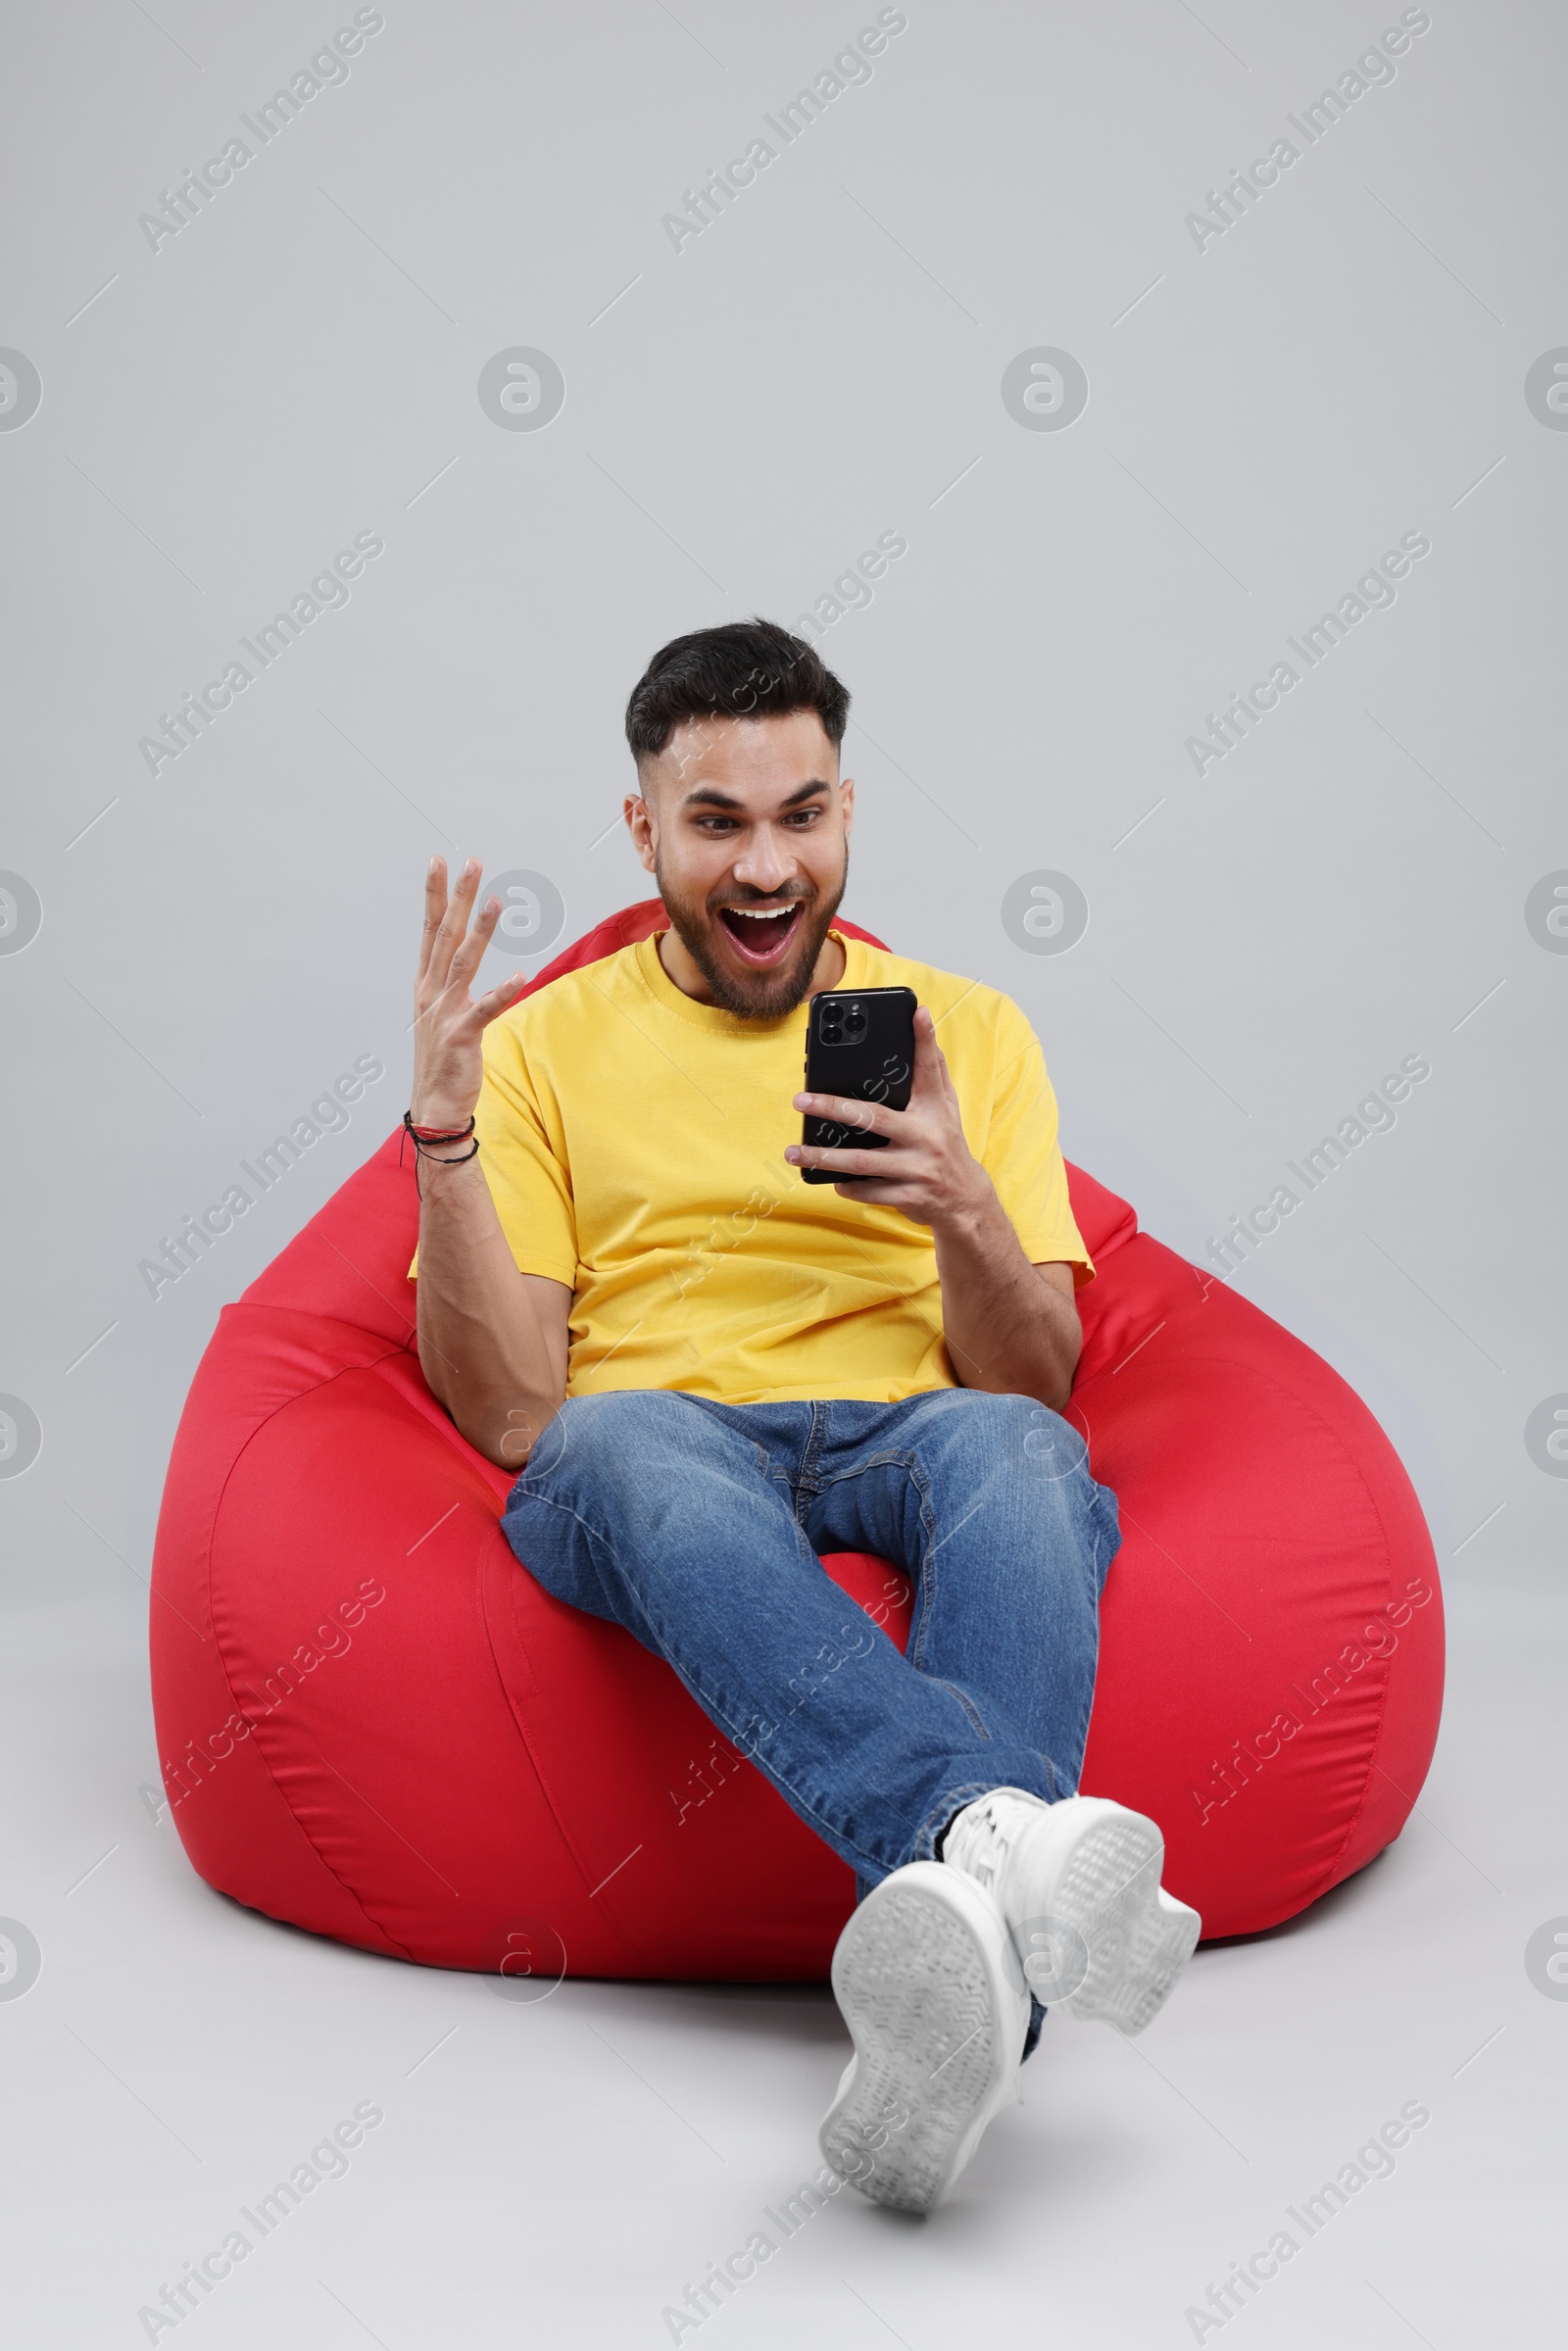 Photo of Emotional young man using smartphone on bean bag chair against grey background